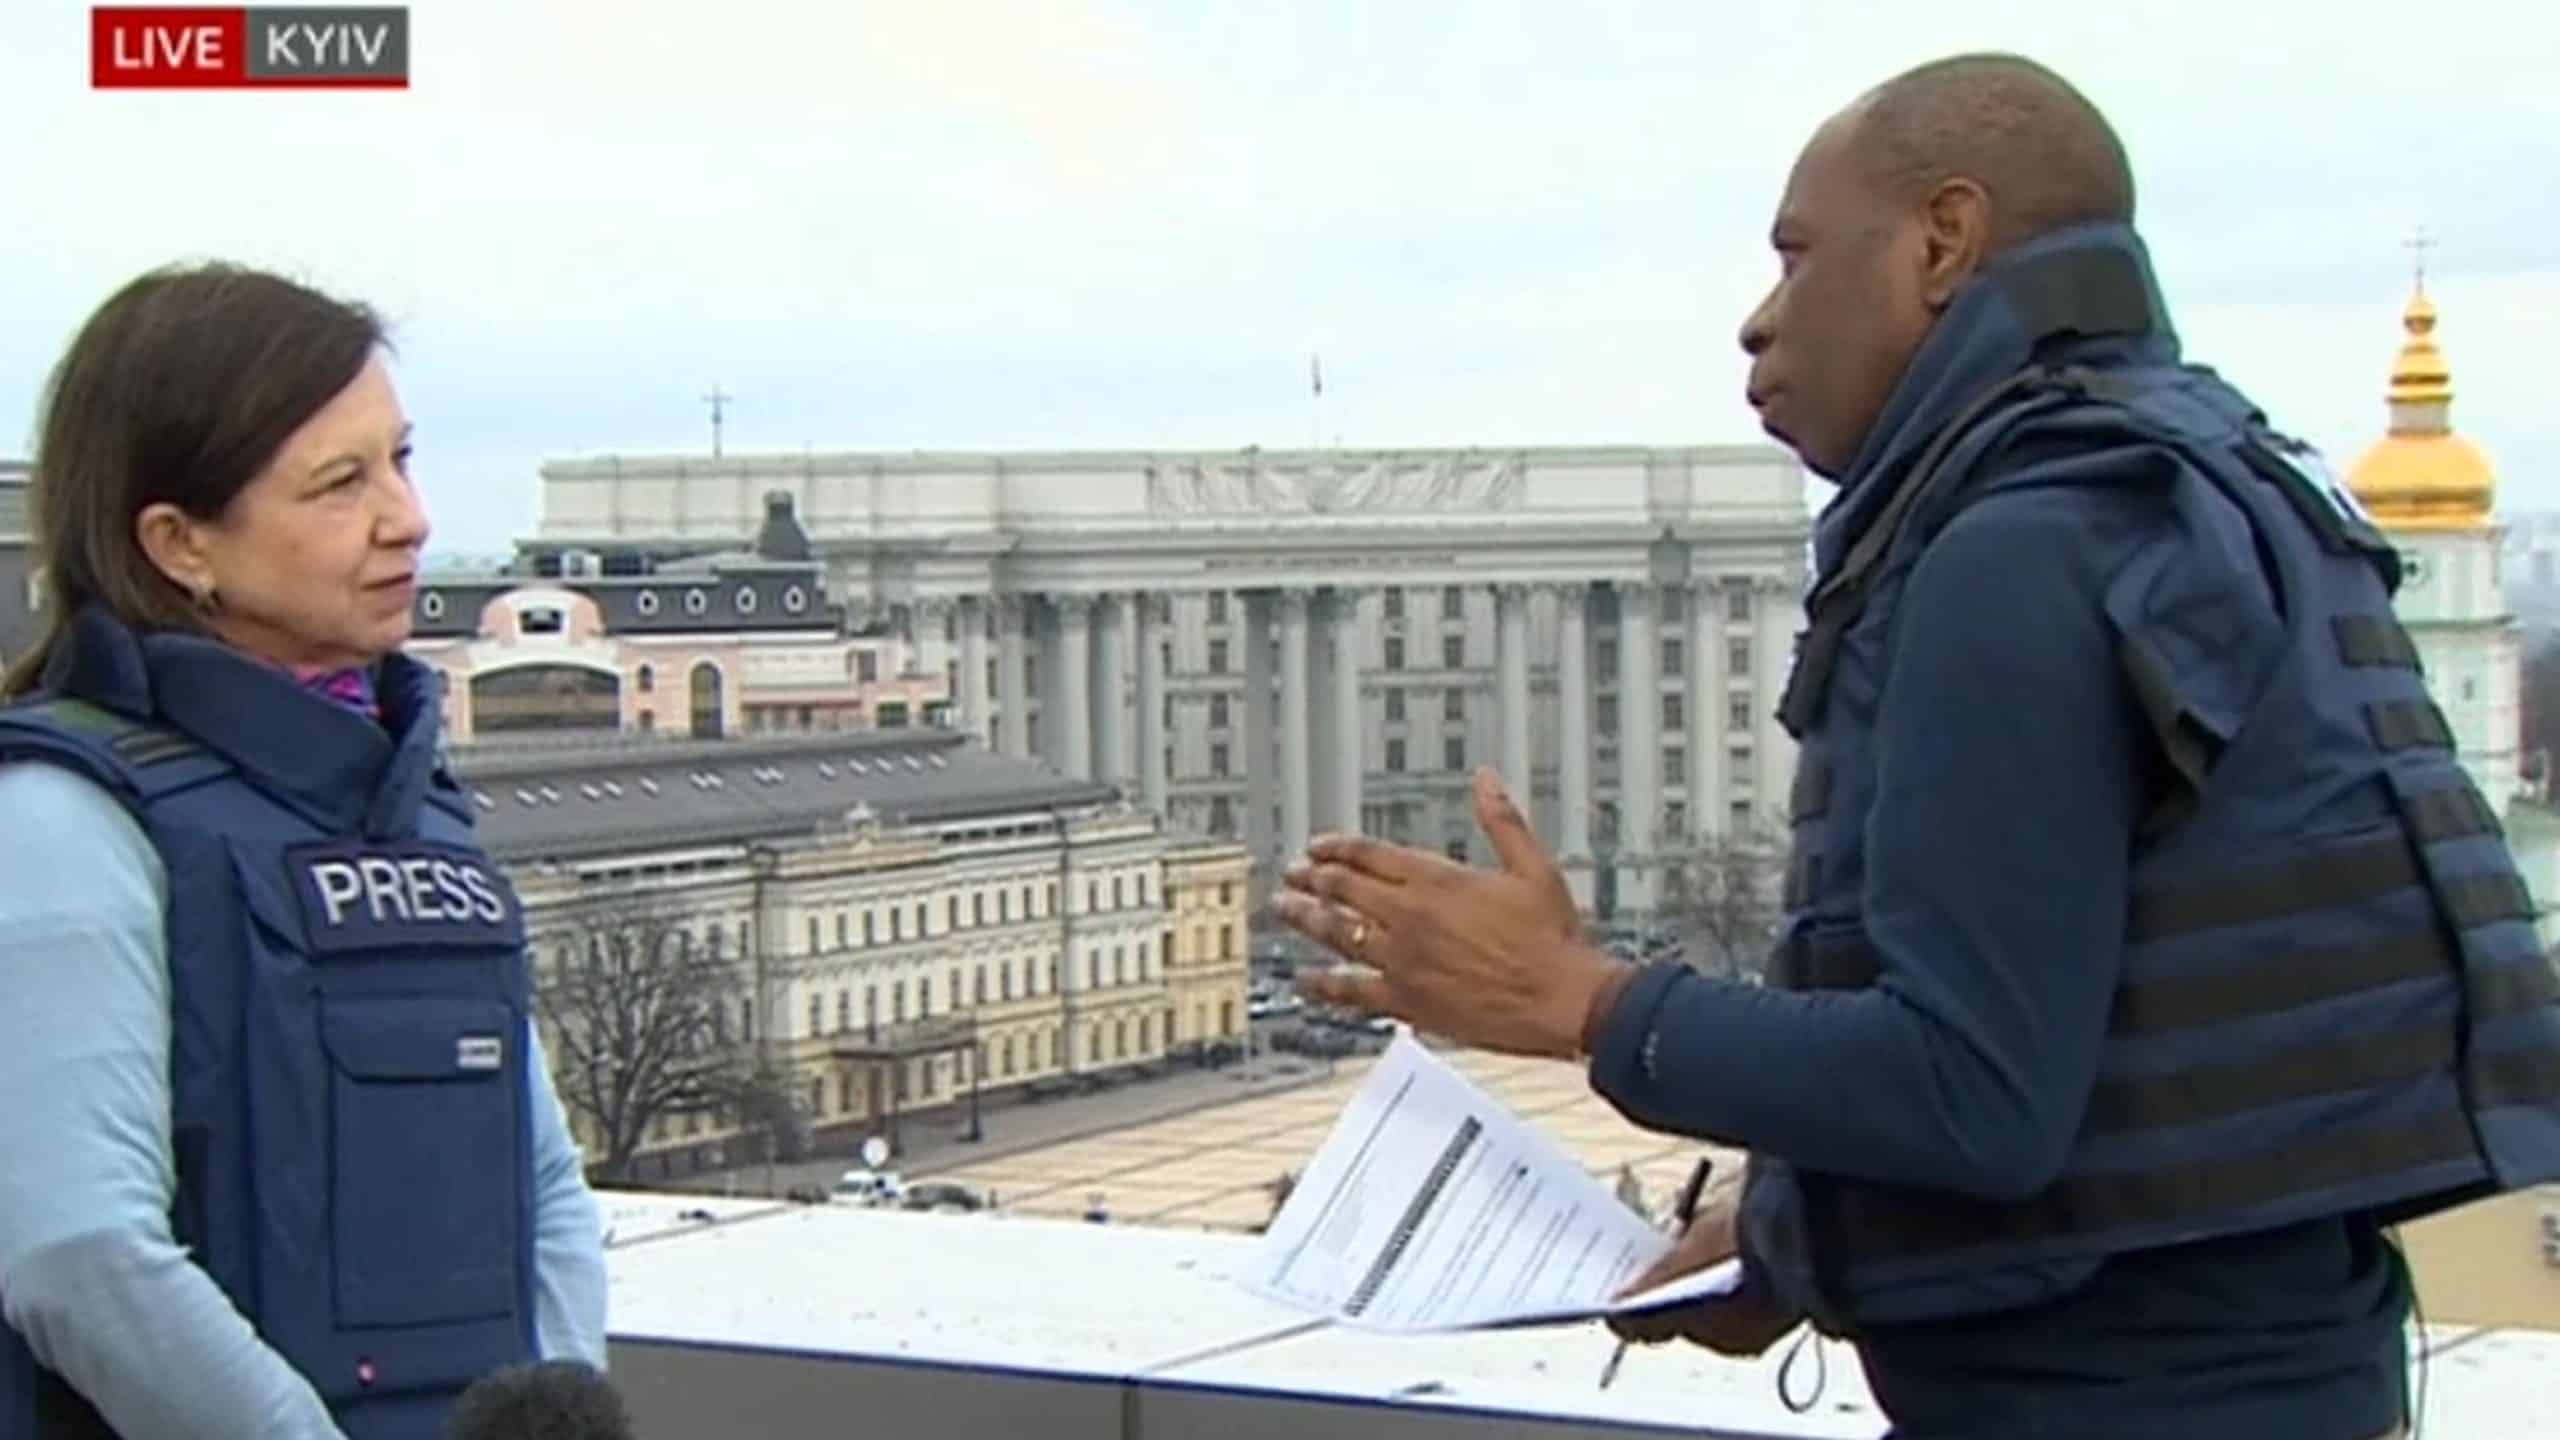 ‘It’s our job’: BBC’s Clive Myrie explains why he is staying in Kyiv